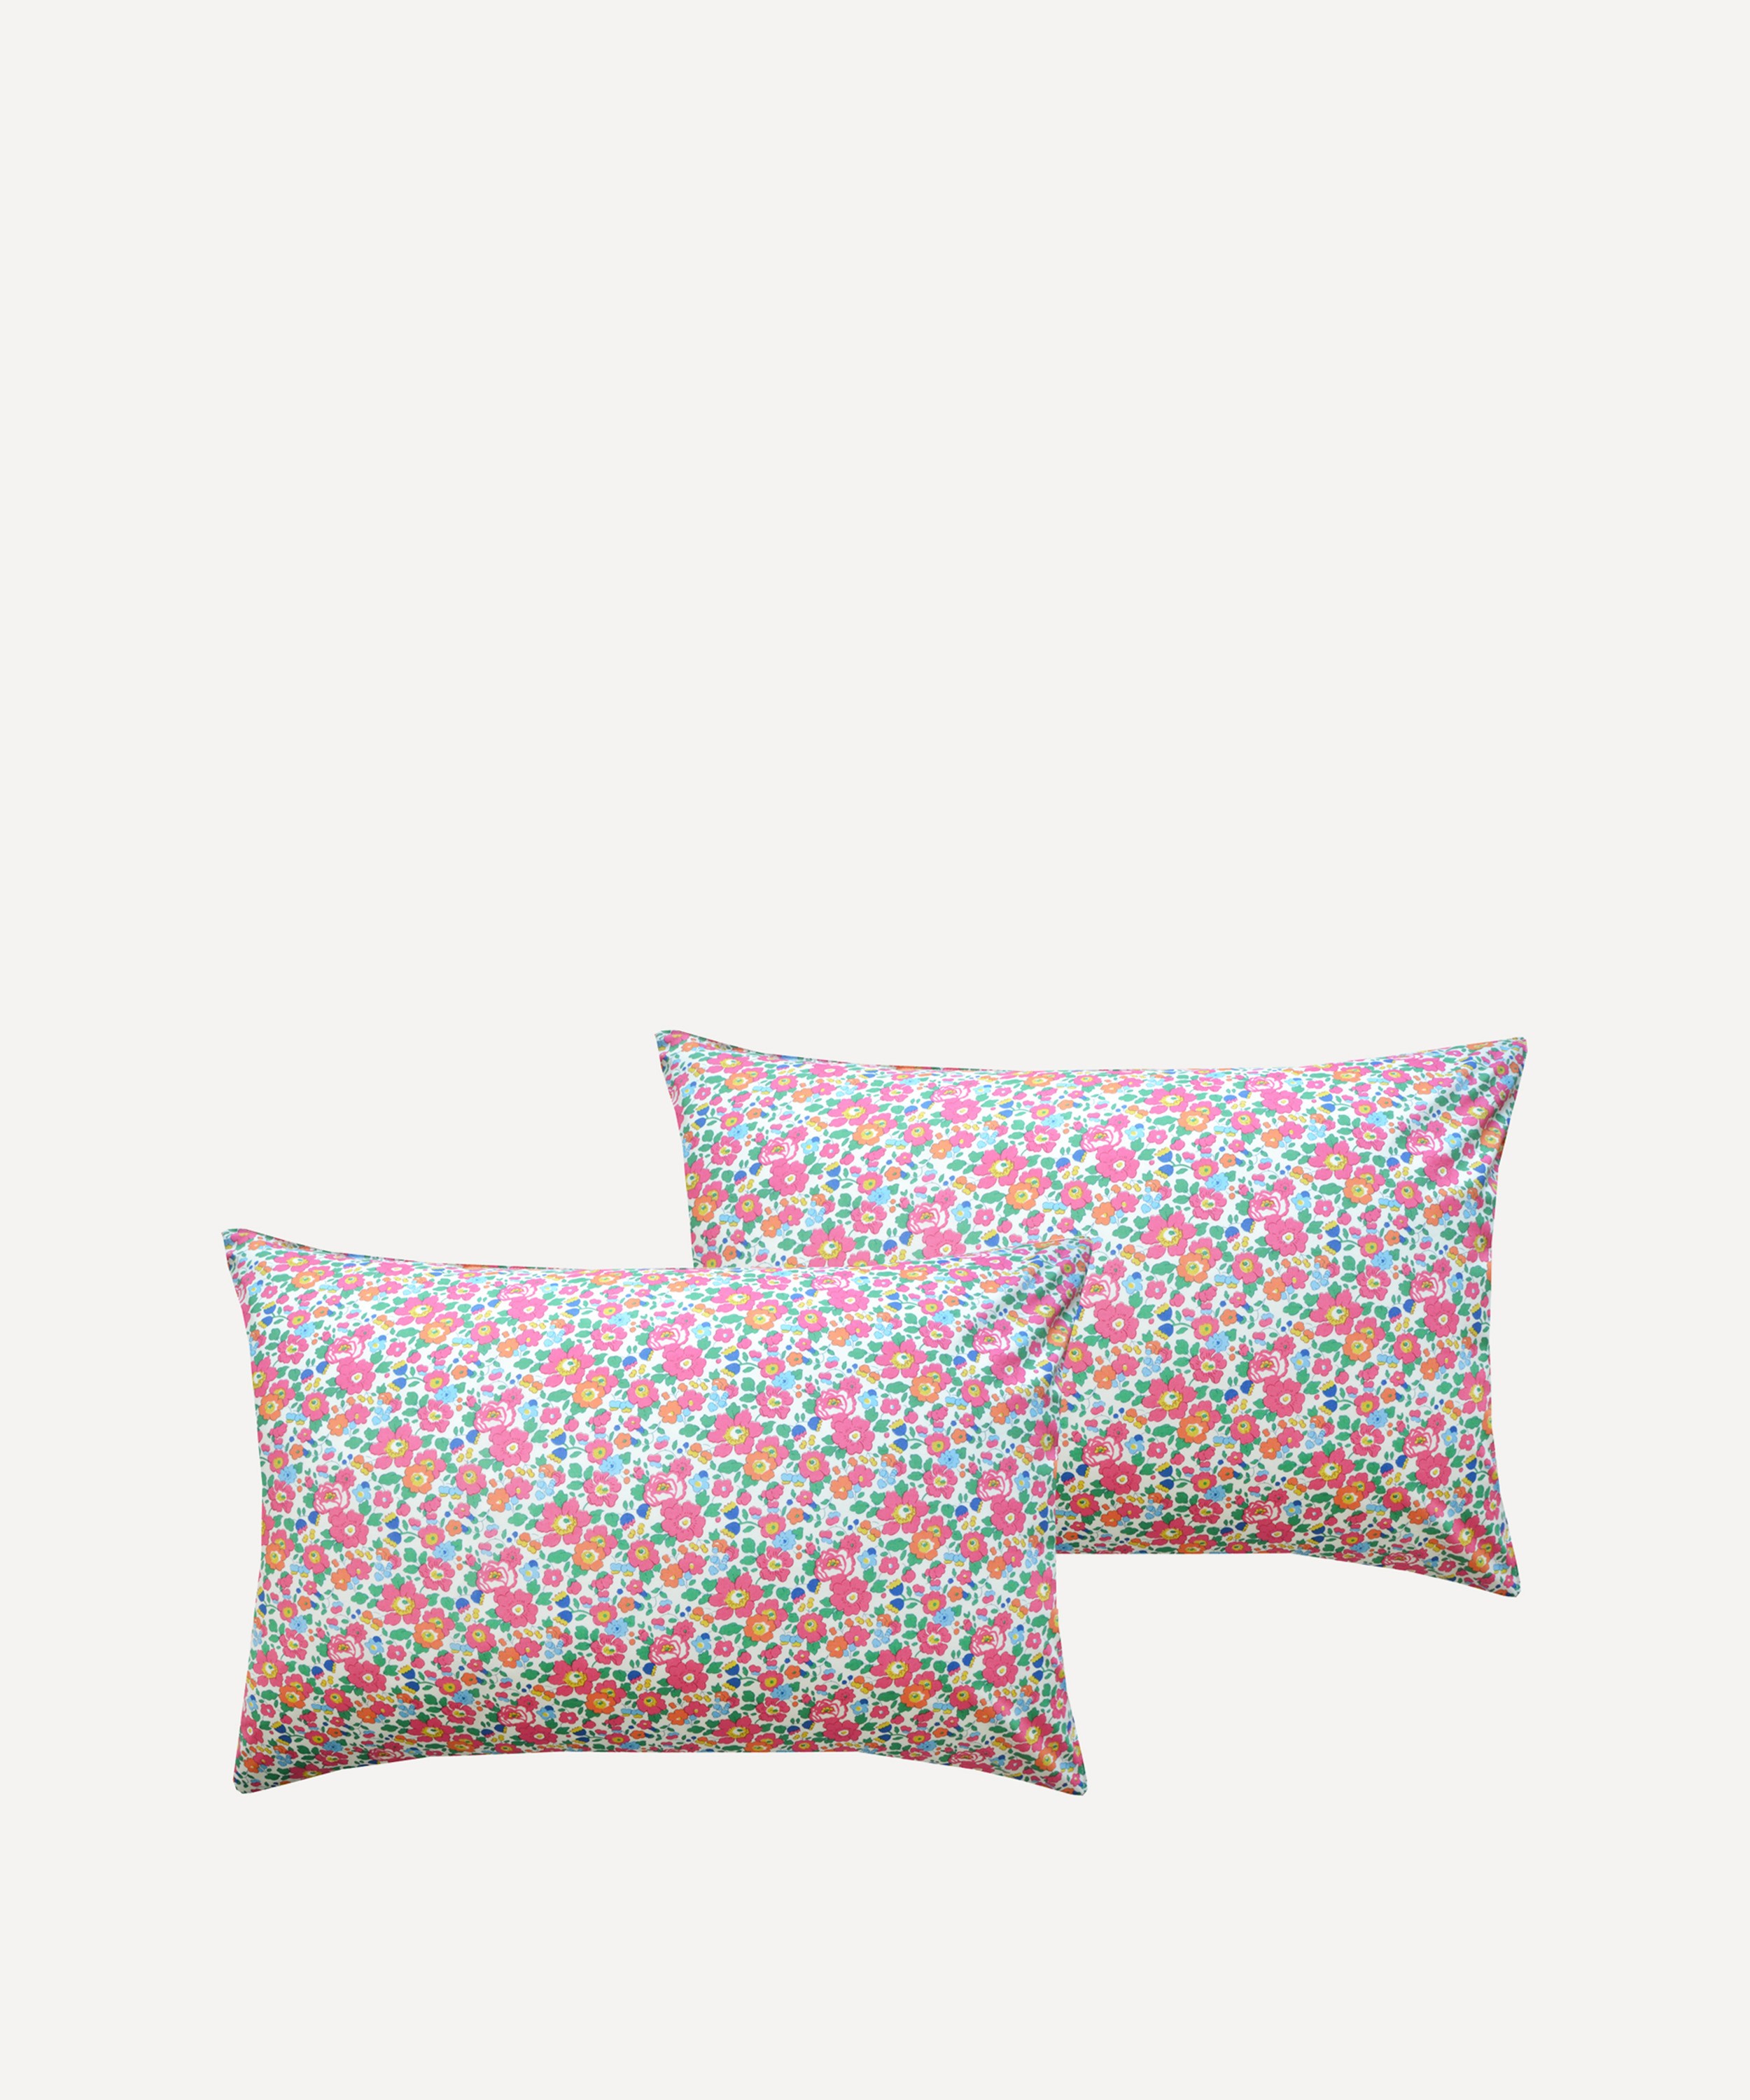 Coco & Wolf - Betsy Deep Pink Super King Duvet Cover Set image number 3